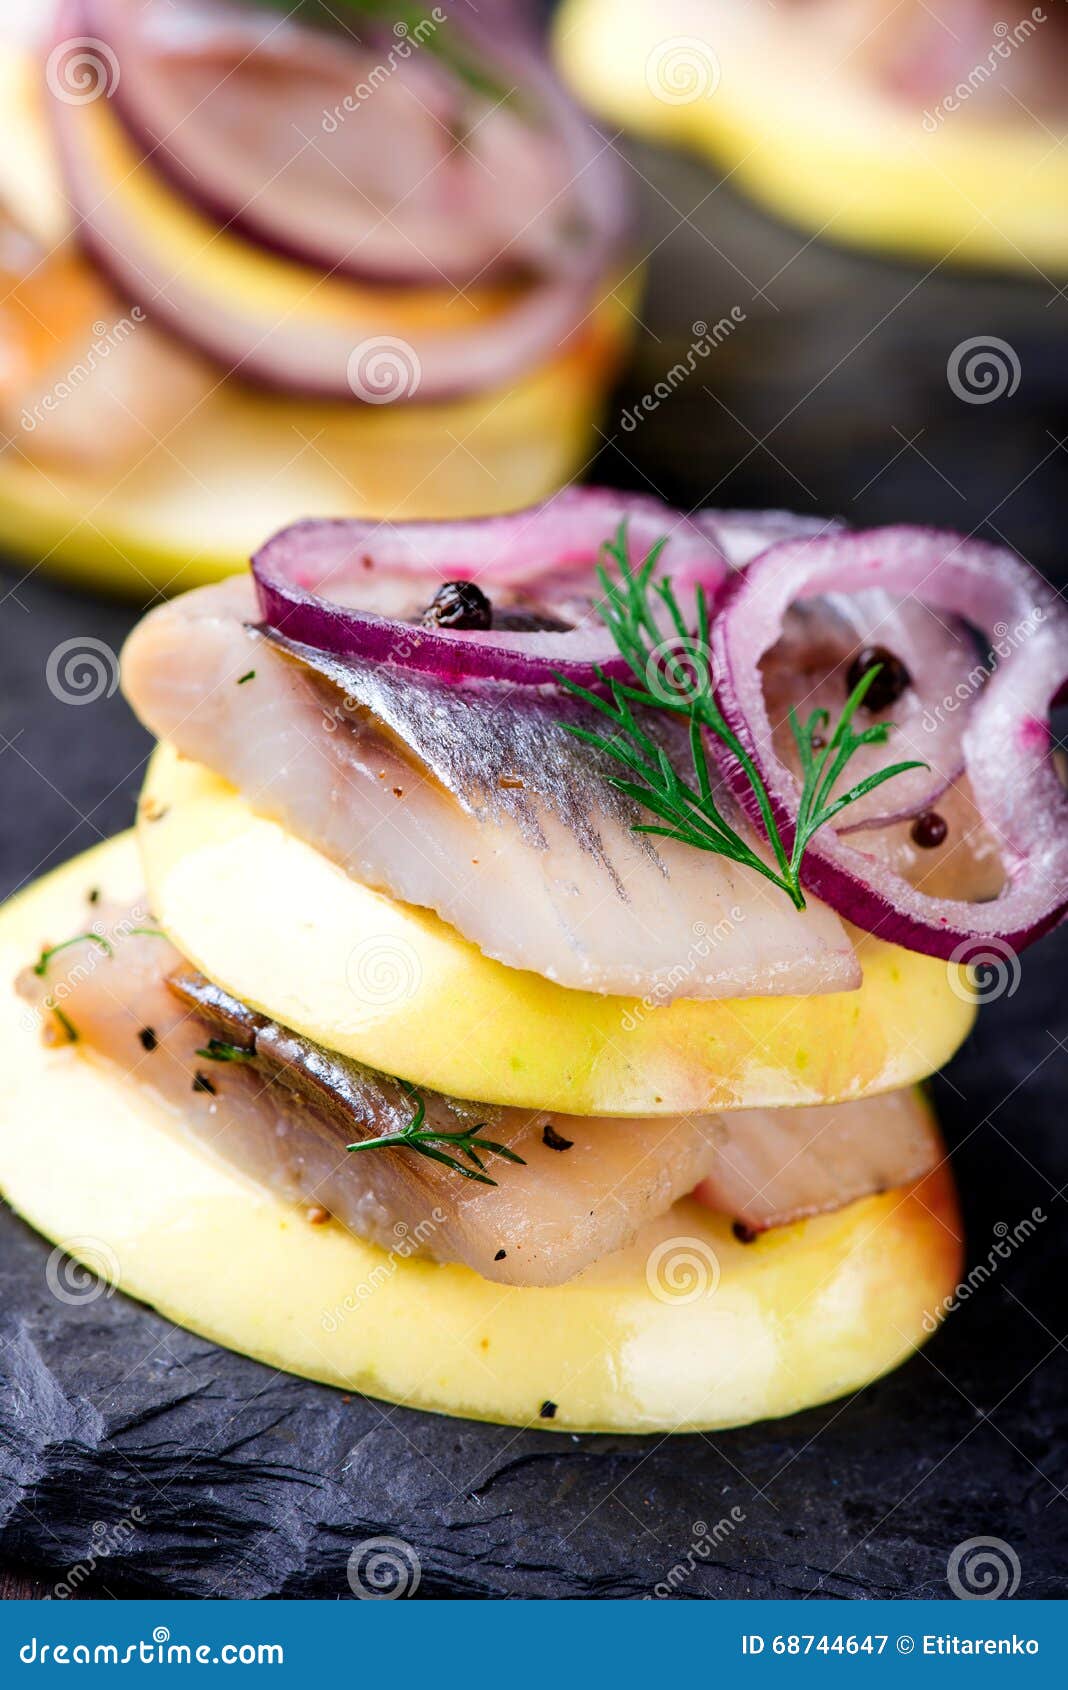 Appetizer Canape with Herring, Apples Stock Image - Image of fragrant ...